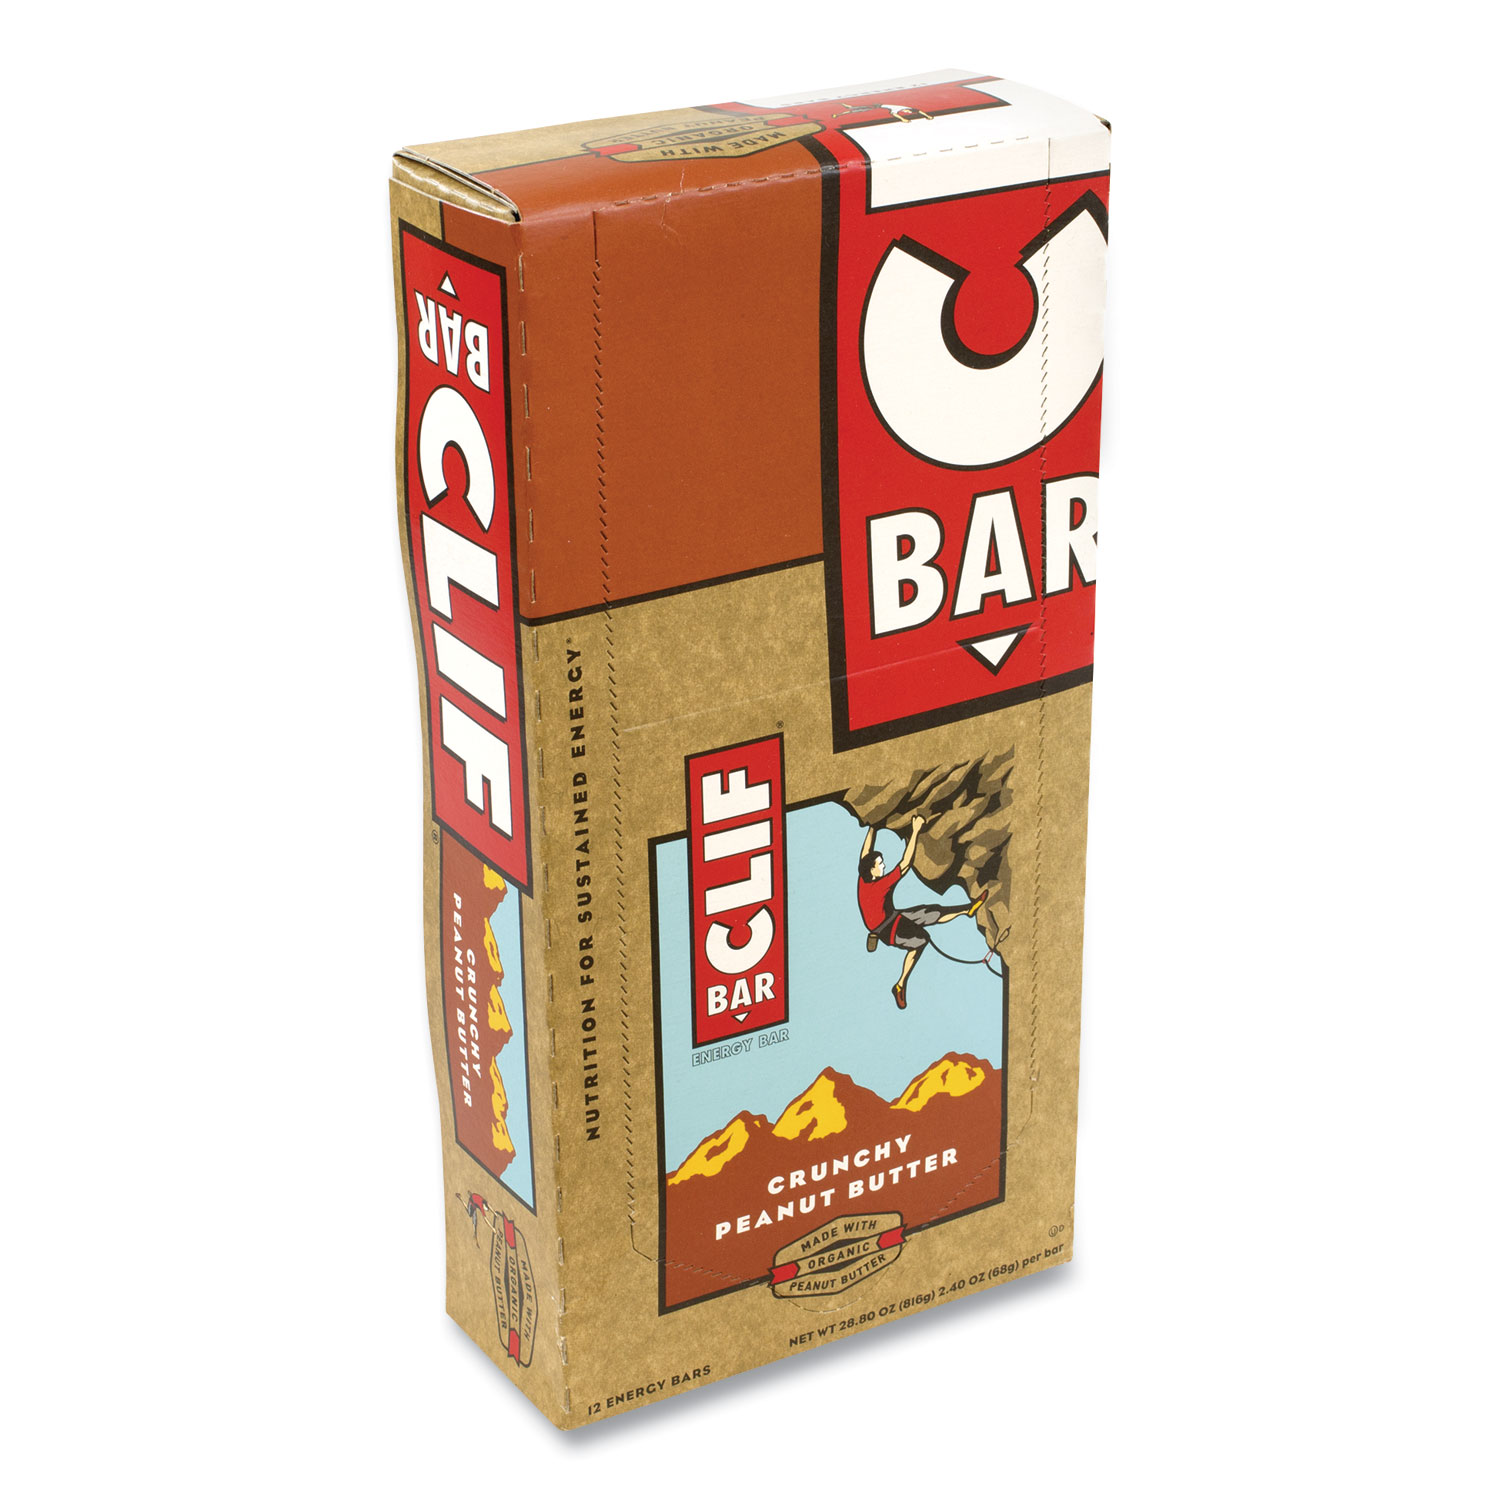  CLIF Bar 30120 Energy Bar, Crunchy Peanut Butter, 2.4 oz, 12/Box, Free Delivery in 1-4 Business Days (GRR20900633) 